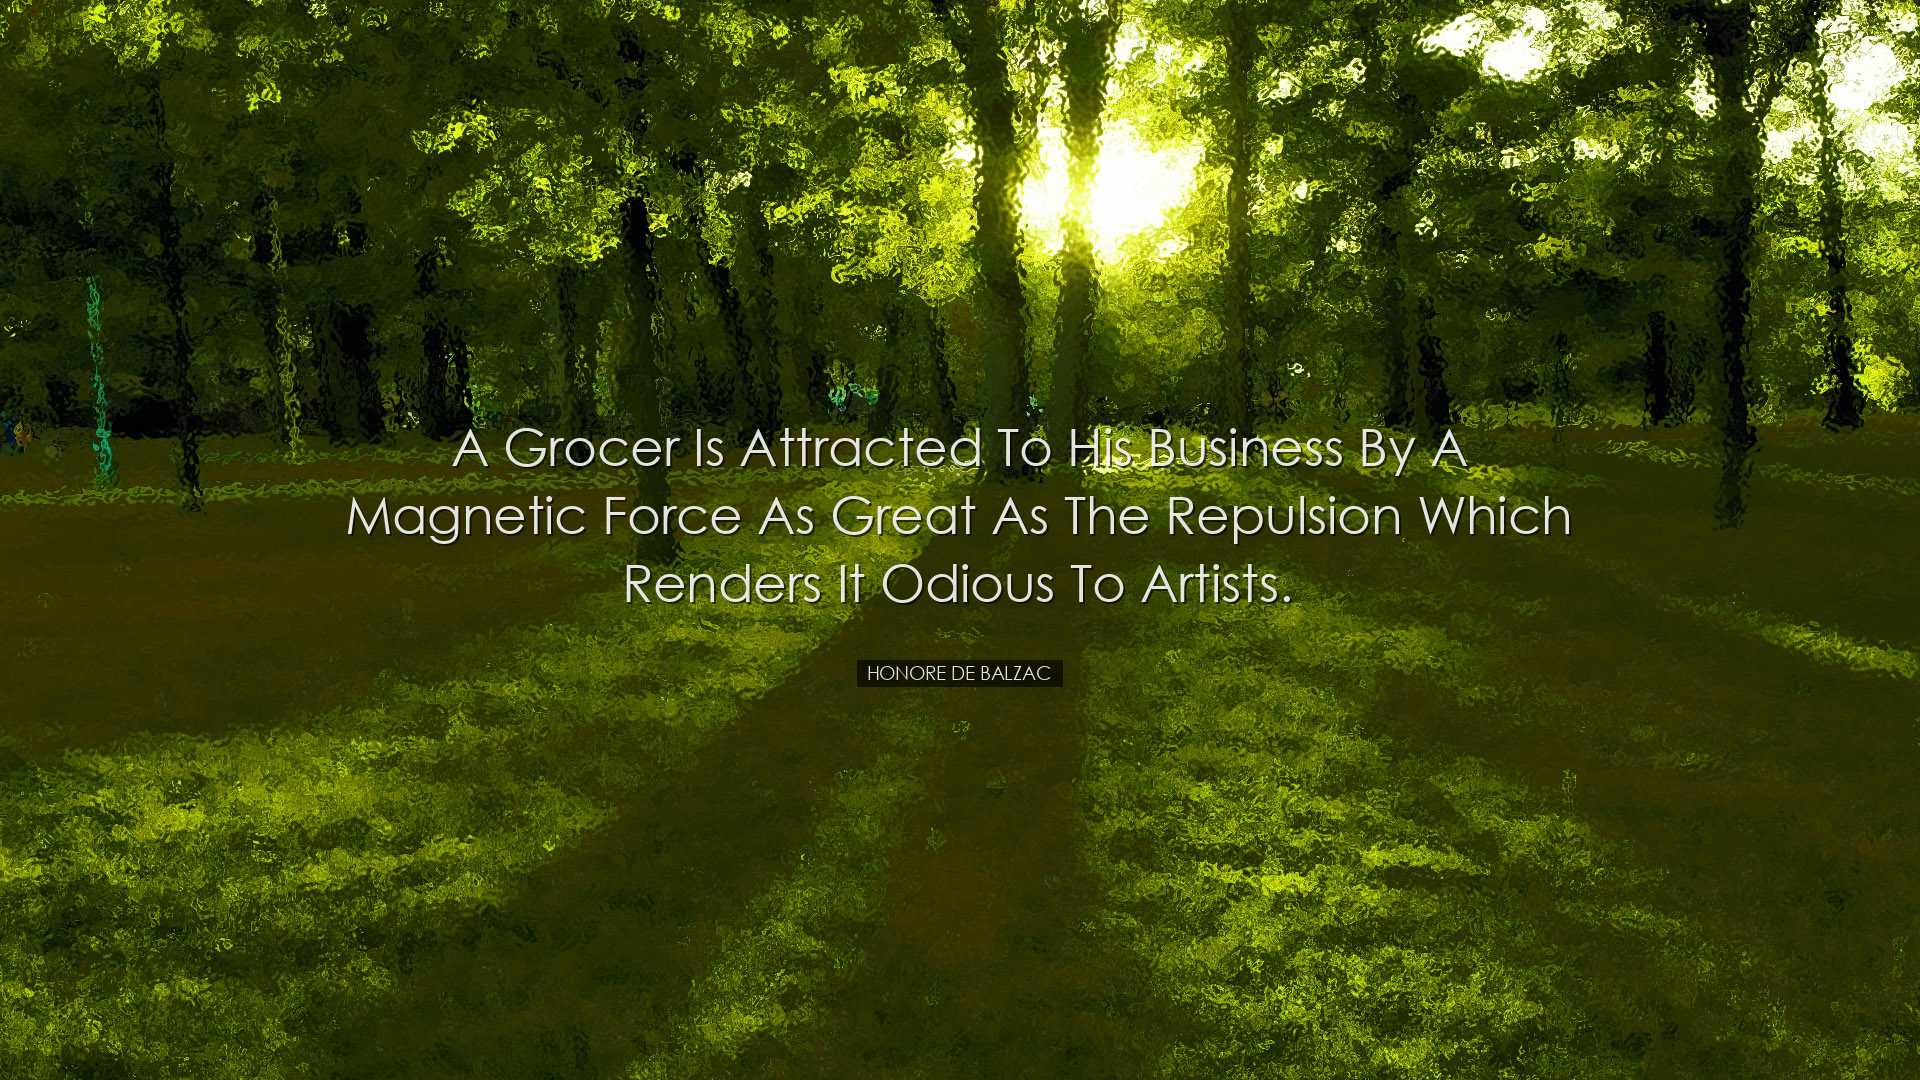 A grocer is attracted to his business by a magnetic force as great